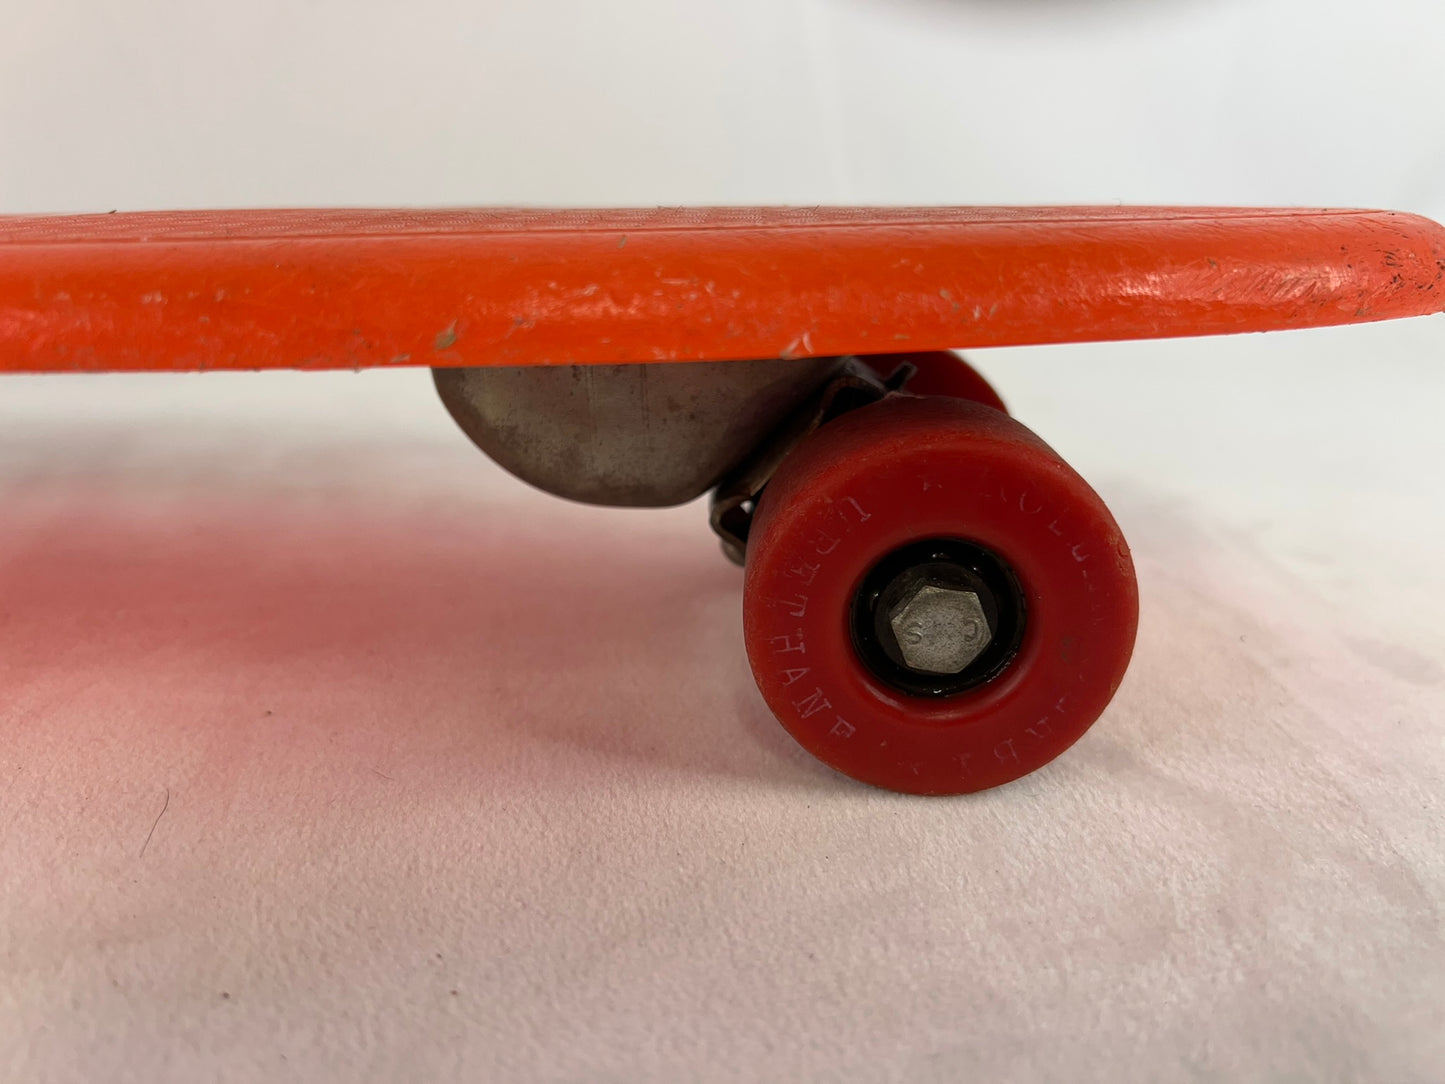 Skateboard 1970 Vintage Roller Derby No 15P All Original Works Perfectly RARE Red